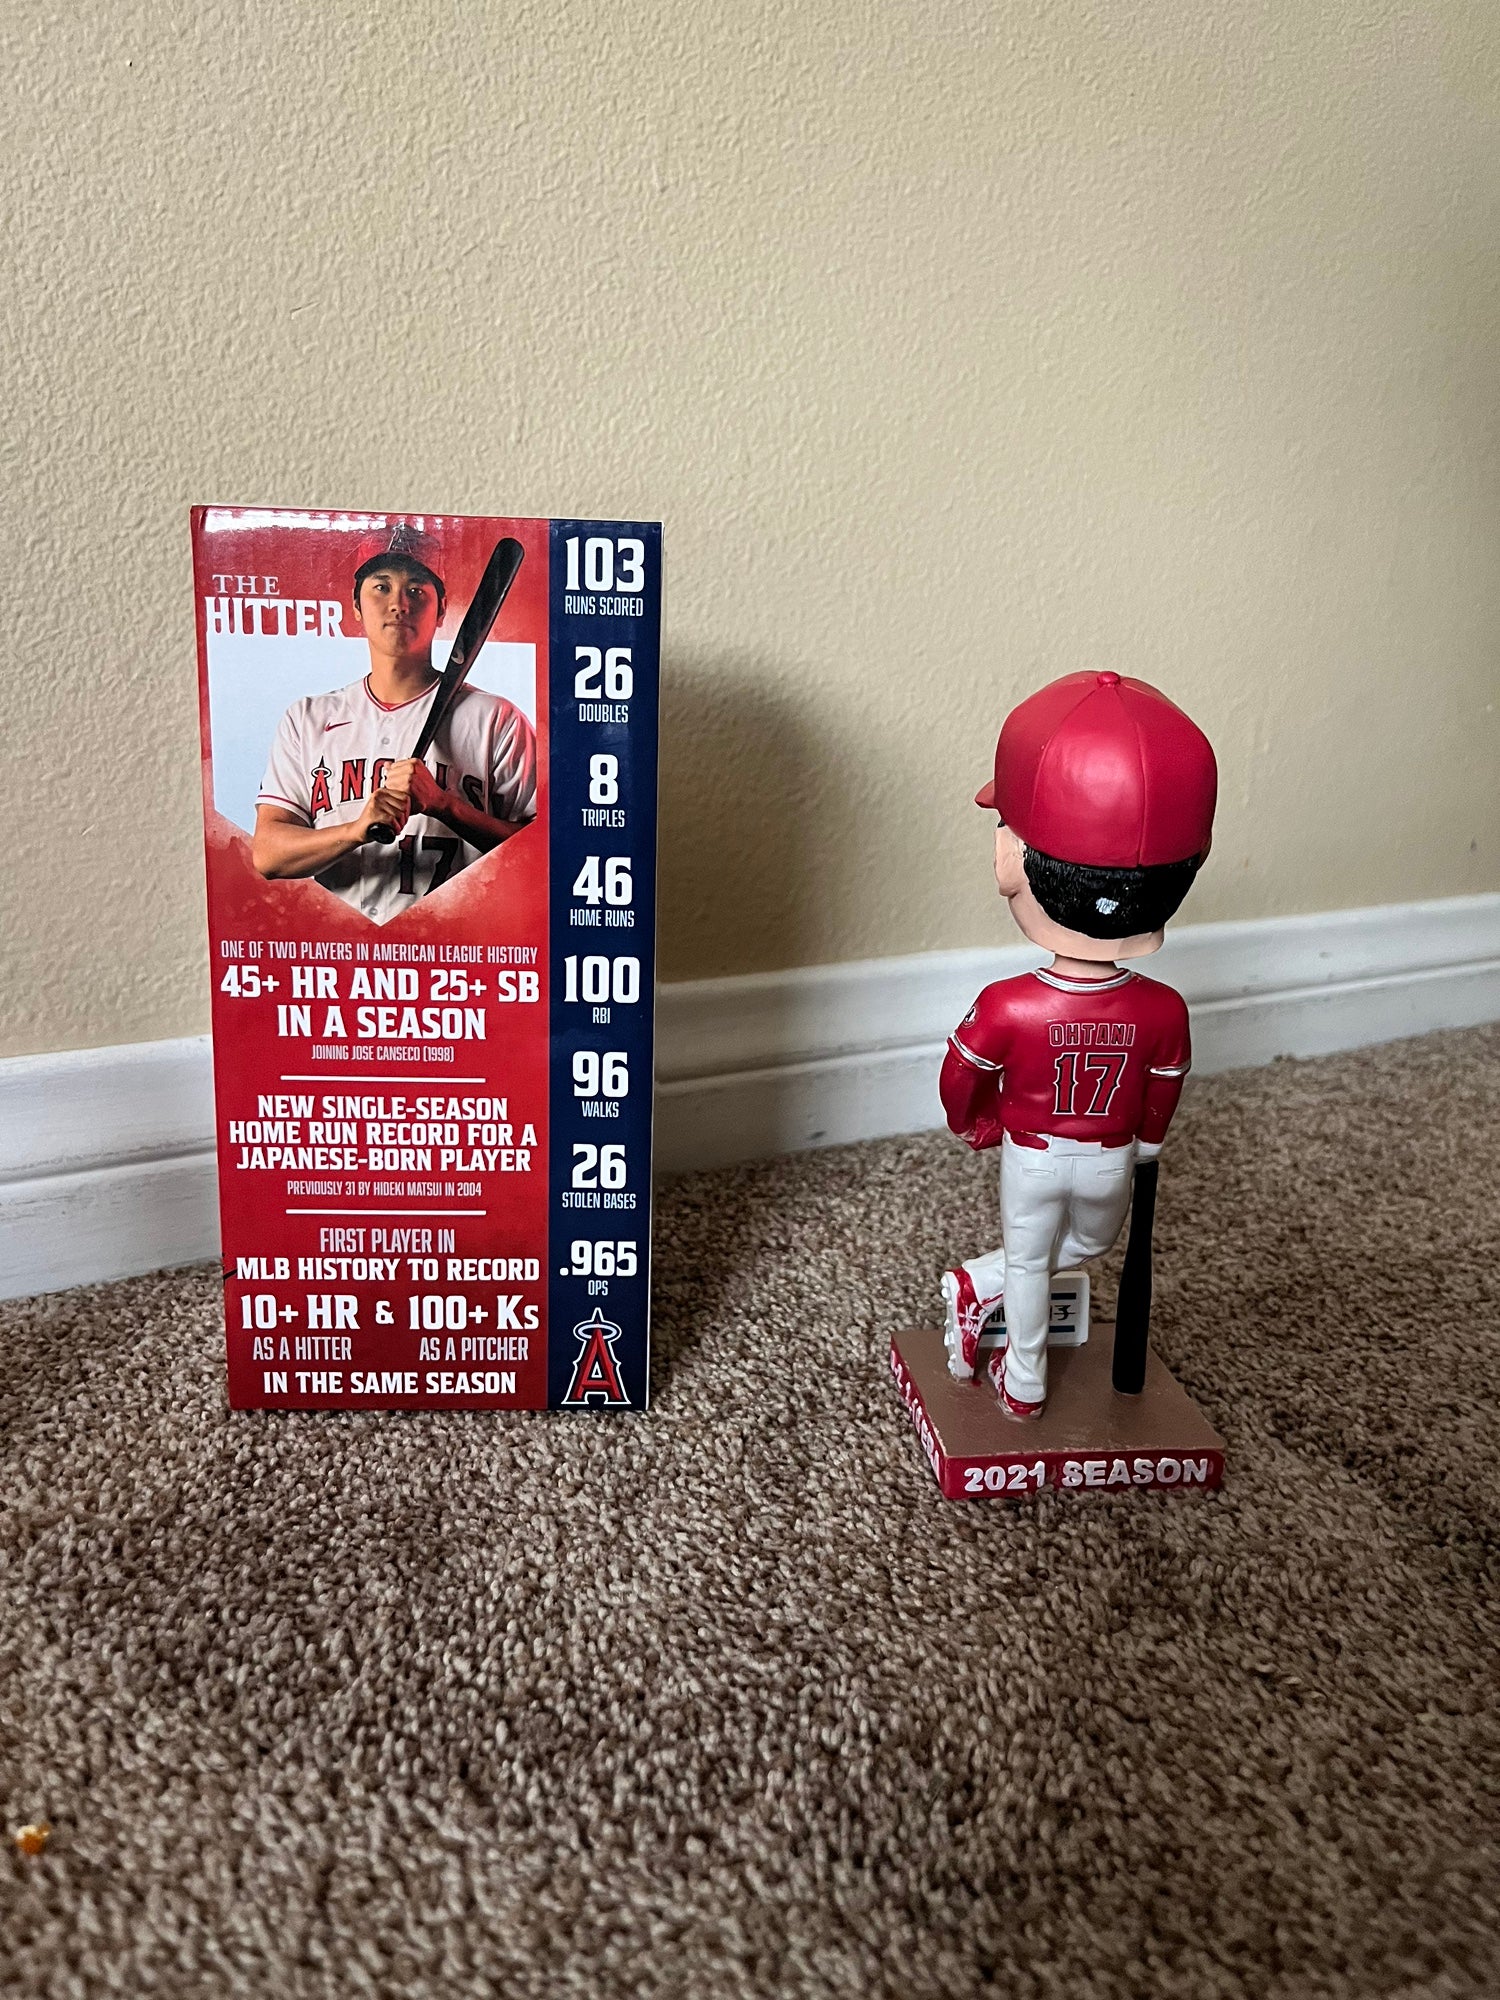 Shohei Ohtani Angels Giveaway Lot: Bobblehead, Face Shirt, Pillow, Retro  Jersey Shirt for Sale in Orange, CA - OfferUp